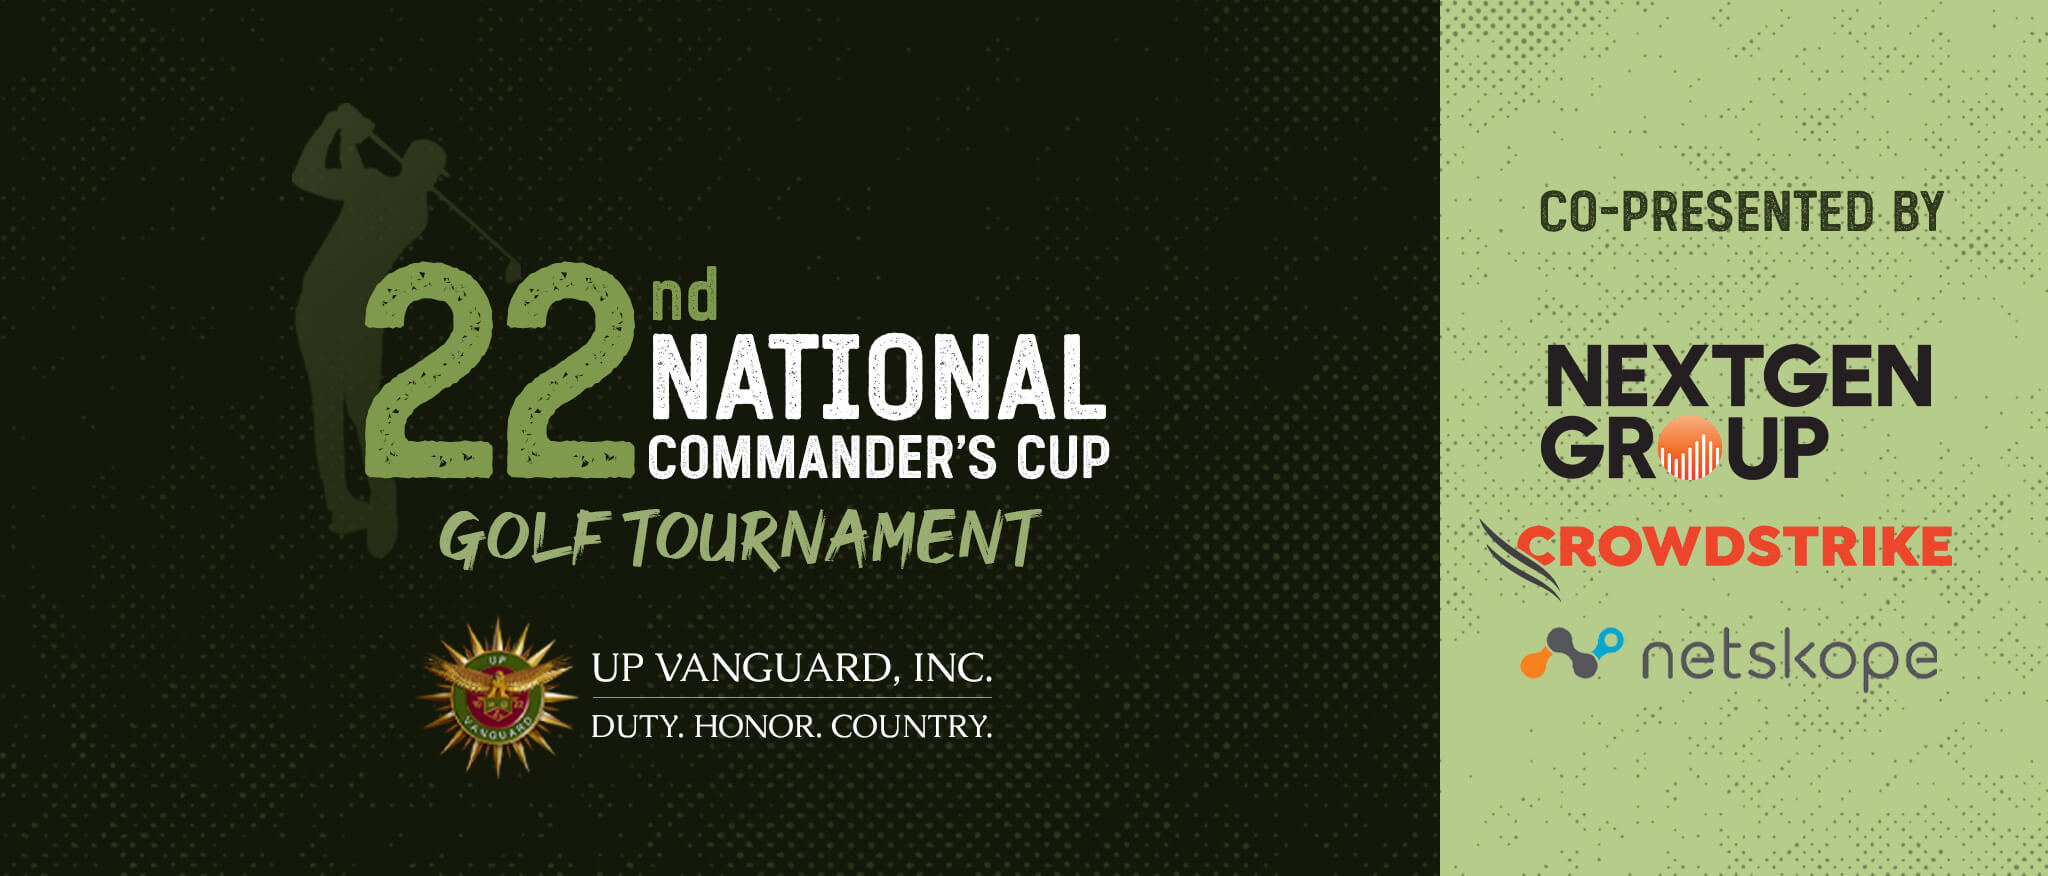 22nd National Commander’s Cup Golf Tournament